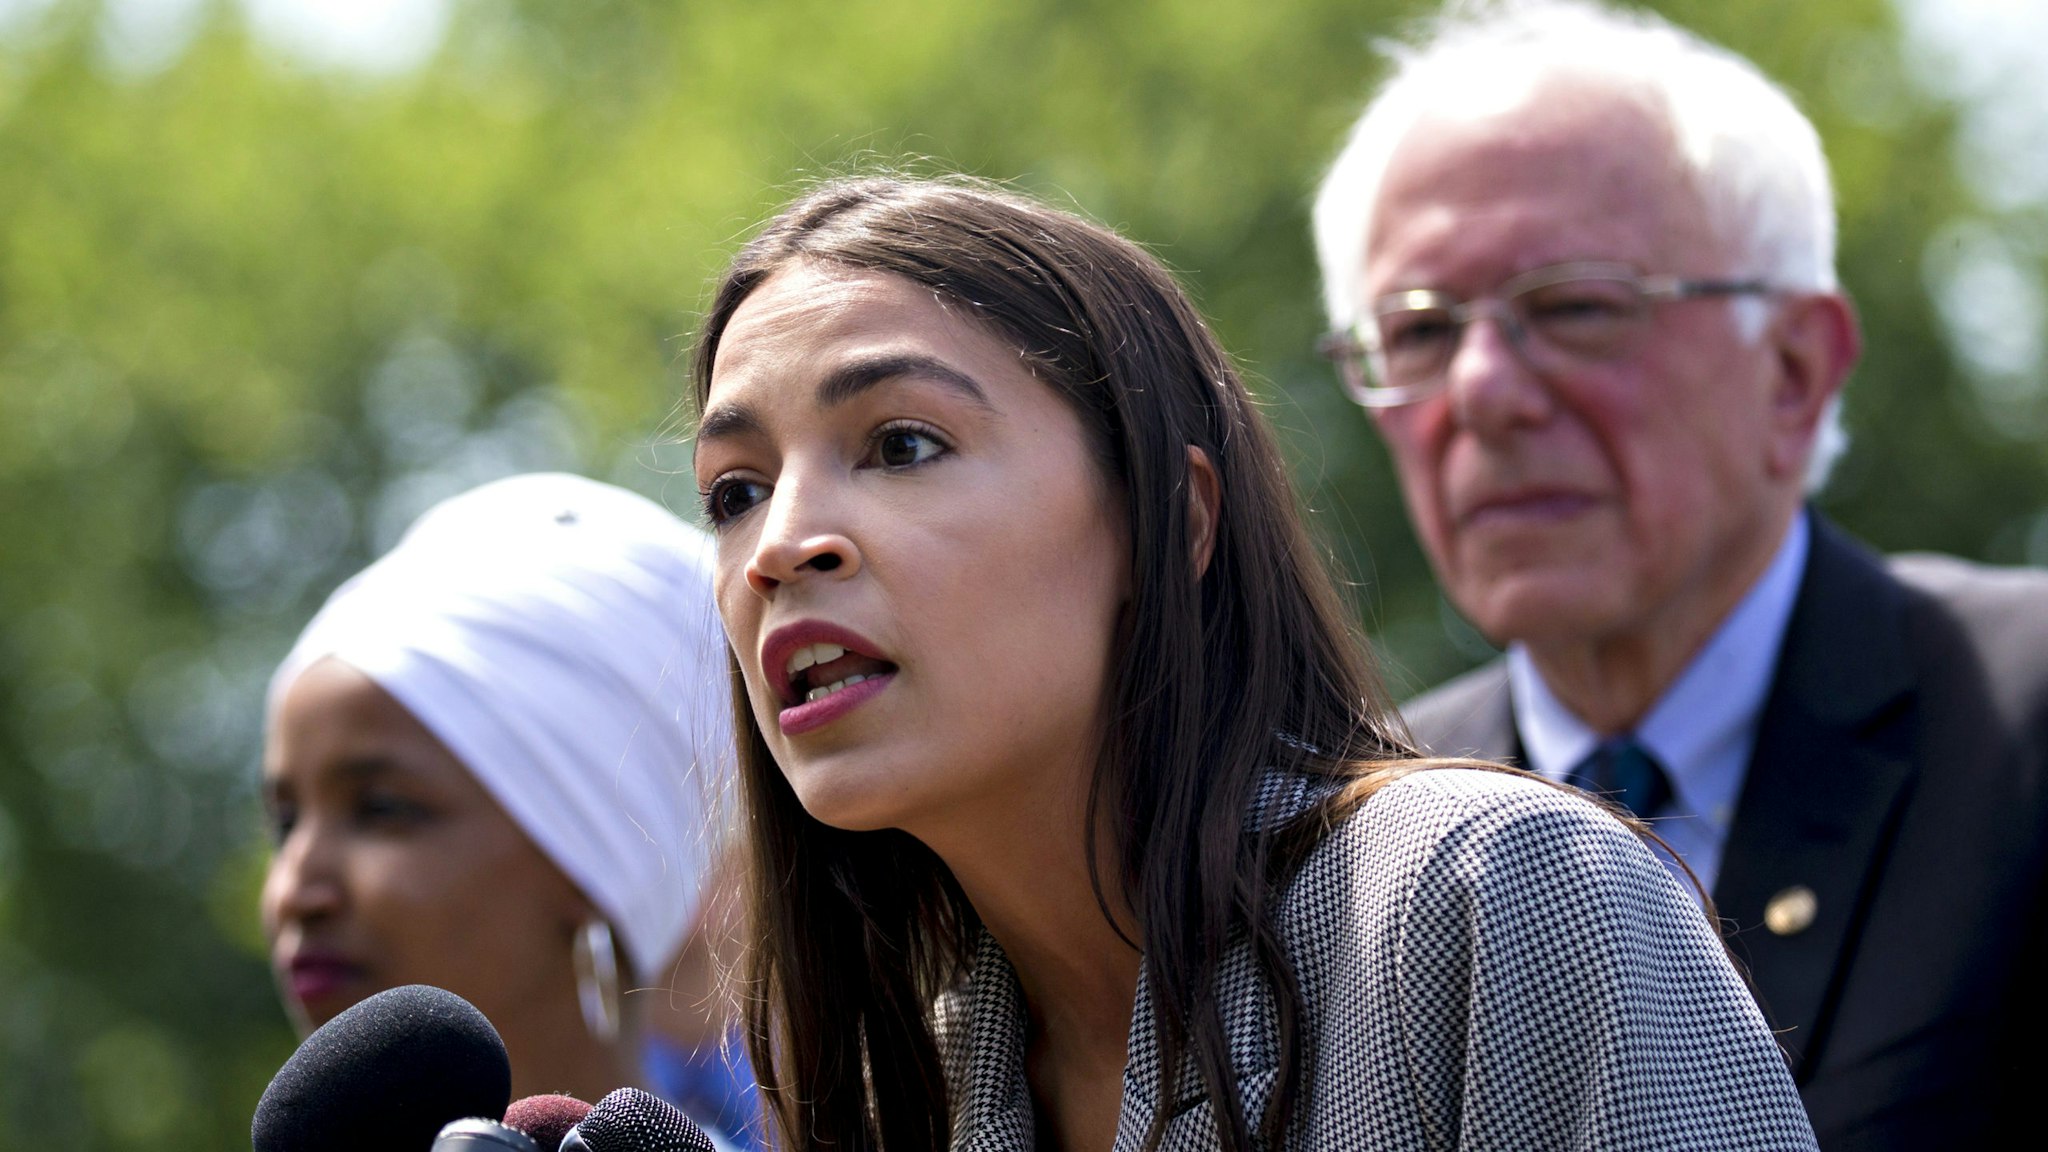 Representative Alexandria Ocasio-Cortez, a Democrat from New York, speaks as Senator Bernie Sanders, an independent from Vermont, right, and Representative Ilhan Omar, a Democrat from Minnesota, left, listen during a news conference announcing college affordability legislation on Capitol Hill in Washington, D.C., U.S., on Monday, June 24, 2019. Sanders is proposing to cancel the nation's outstanding $1.6 trillion of student debt and offsetting the cost with a tax on Wall Street transactions.